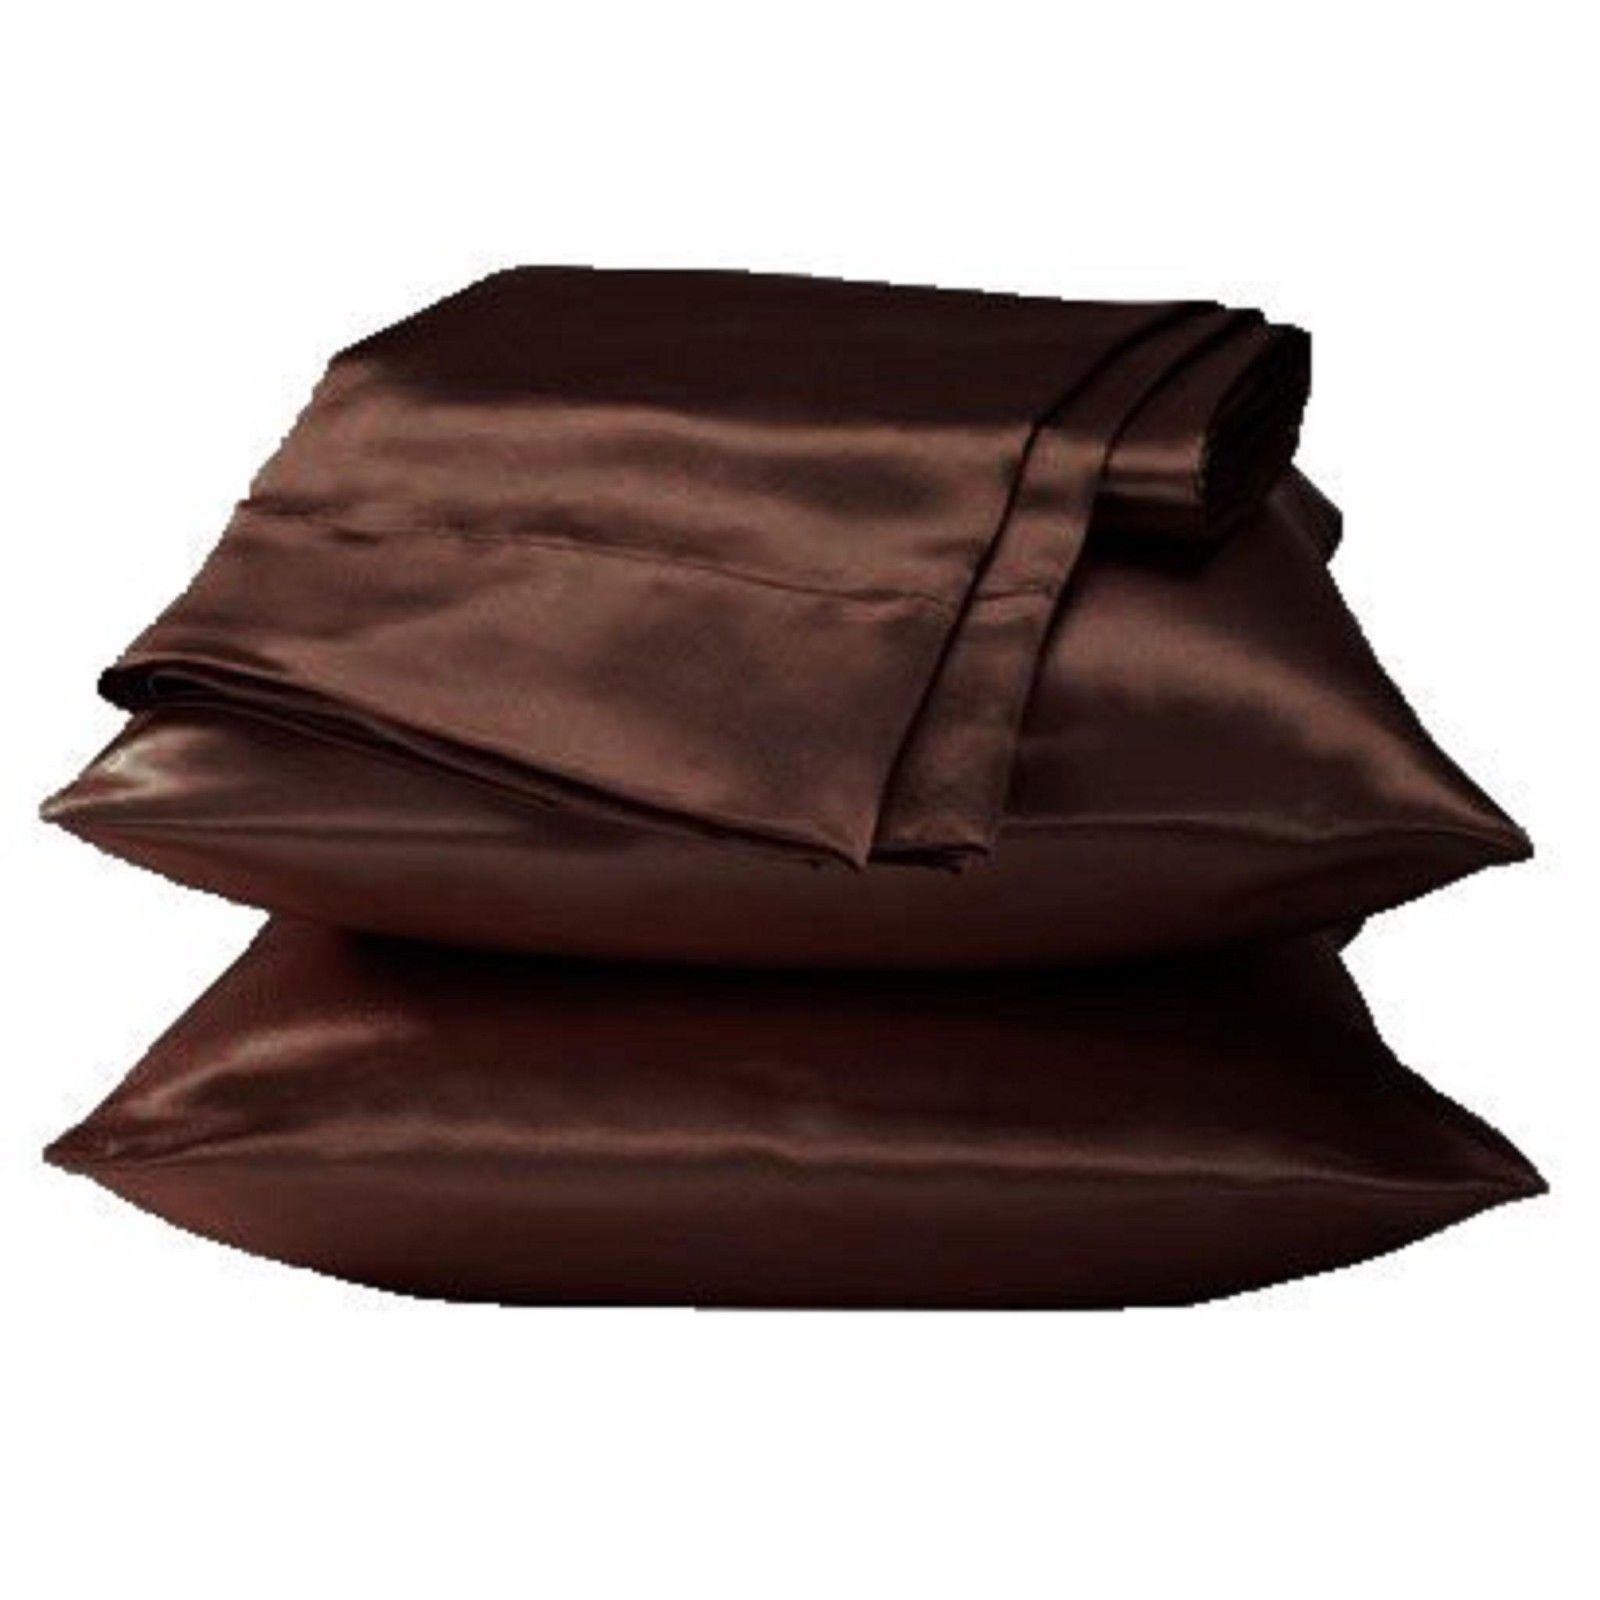 2 Standard / Queen size SATIN Pillow Cases / Covers DARK COFFEE - Brand New - $14.95